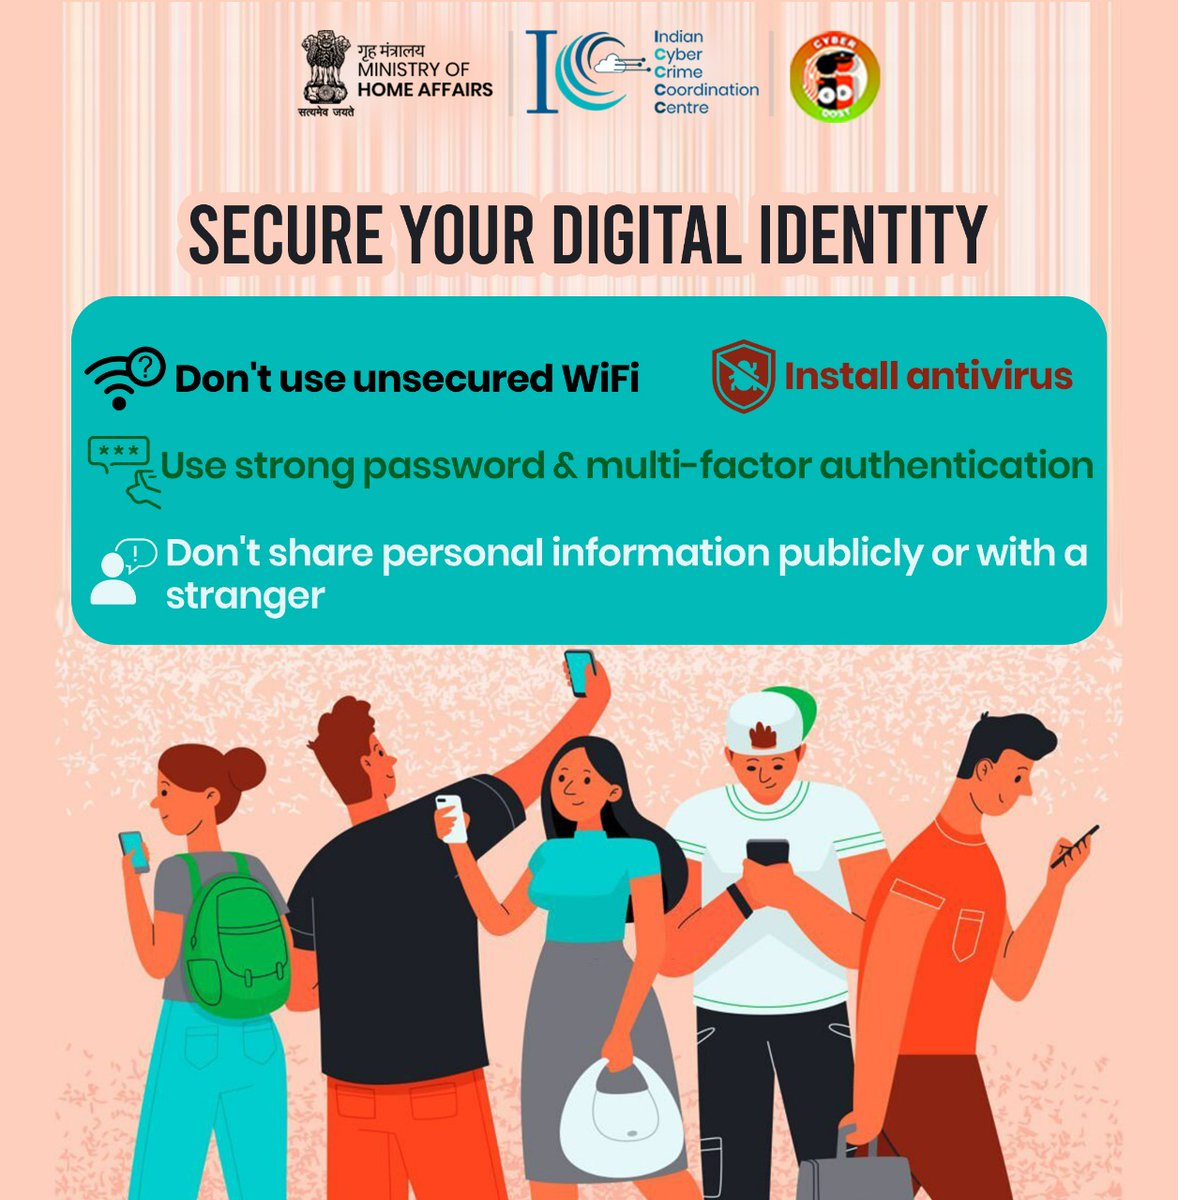 Protect your personal information online to secure your #DigitalIdentity. If you are a victim of #cybercrime, dial 1930 and file a #complaint on cybercrime.gov.in #cyberawareness #OnlineTheft #Cybercrime #SecurePassword #CyberSecurity #i4c #MHA #Dial1930 #WiFi #antivirus